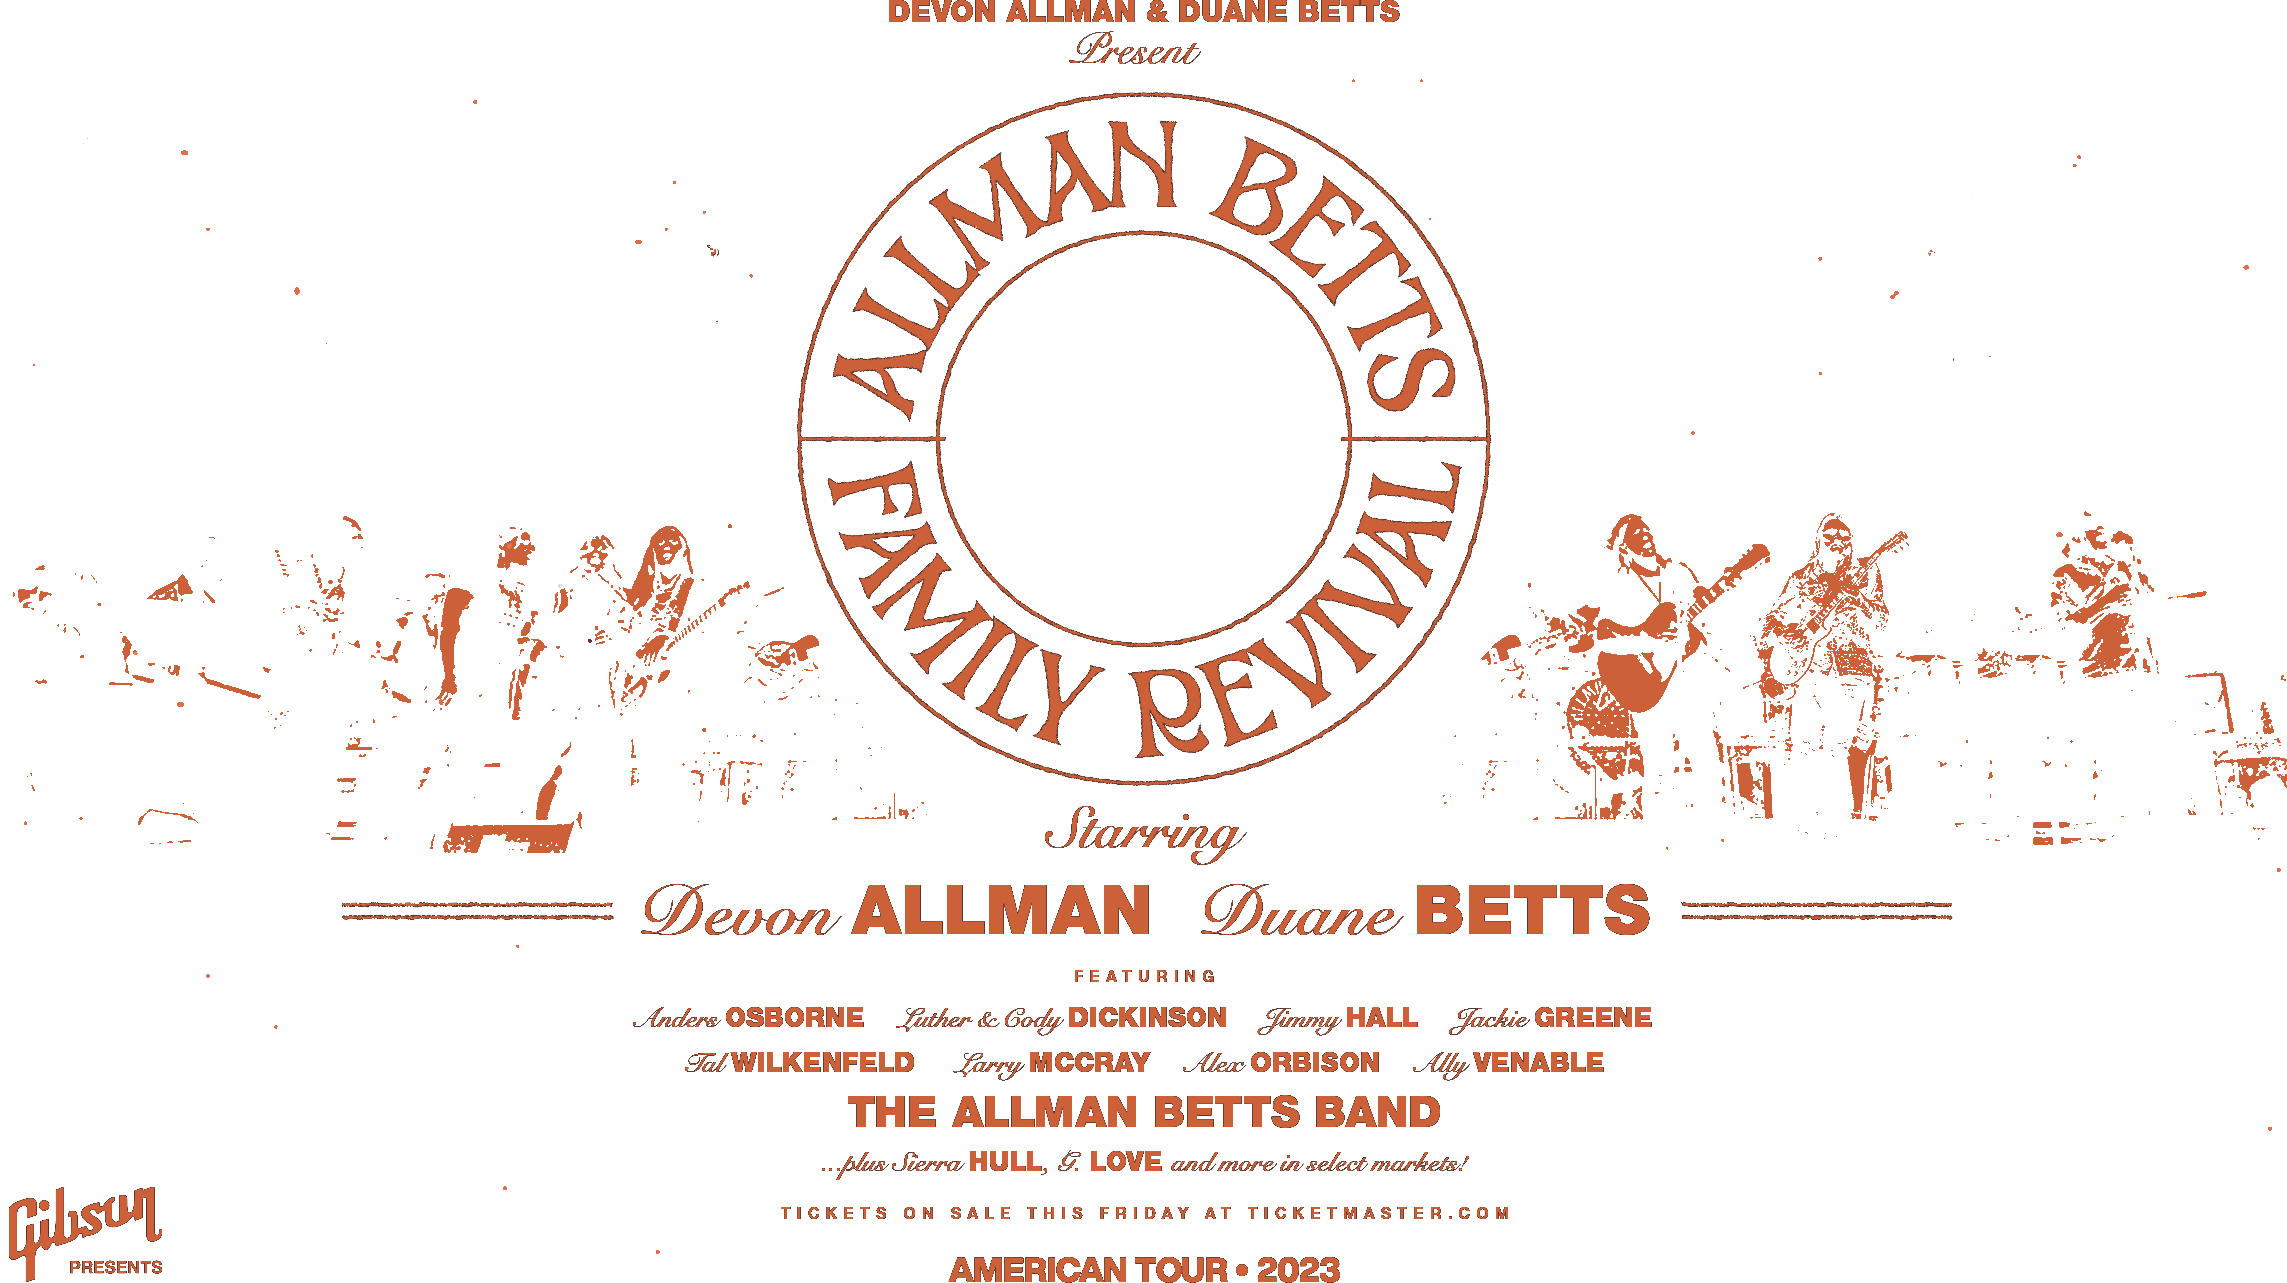 Devon Allman & Duane Betts present Allman Betts Family Revival American Tour 2023 starring Anders Osborne, Luther & Cody Dickinson, Jimmy Hall, Jackie Greene, Tal Wilkenfeld, Larry McCray, Alex Orbison, Ally Venable, The Allman Betts Band ...plus Sierra Hull, G. Love and more in select markets!